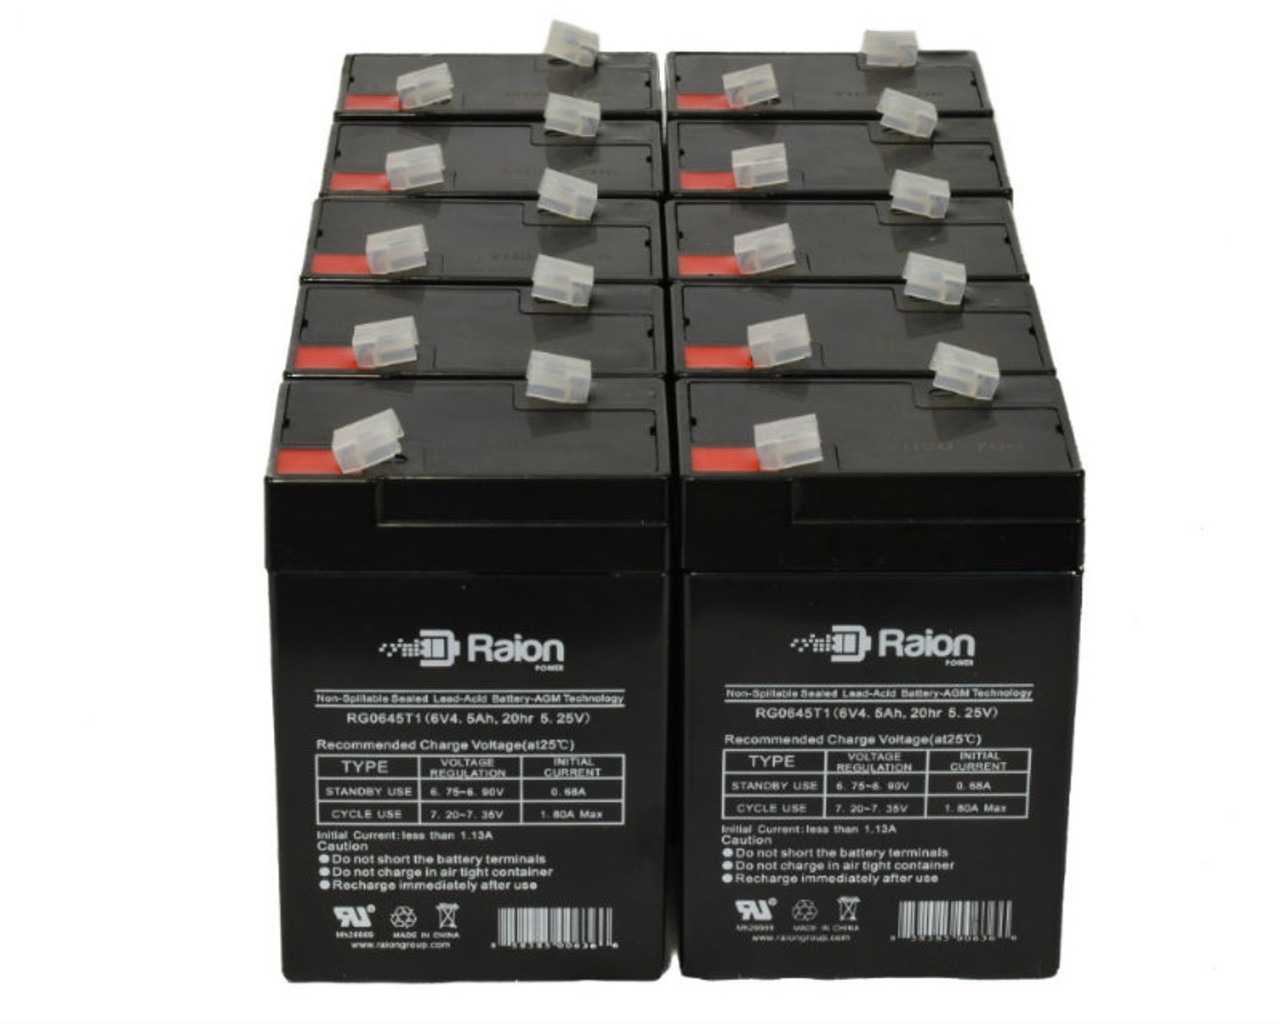 Raion Power 6 Volt 4.5Ah RG0645T1 Replacement Battery for BPOWER BPE 4.5-6 - 10 Pack